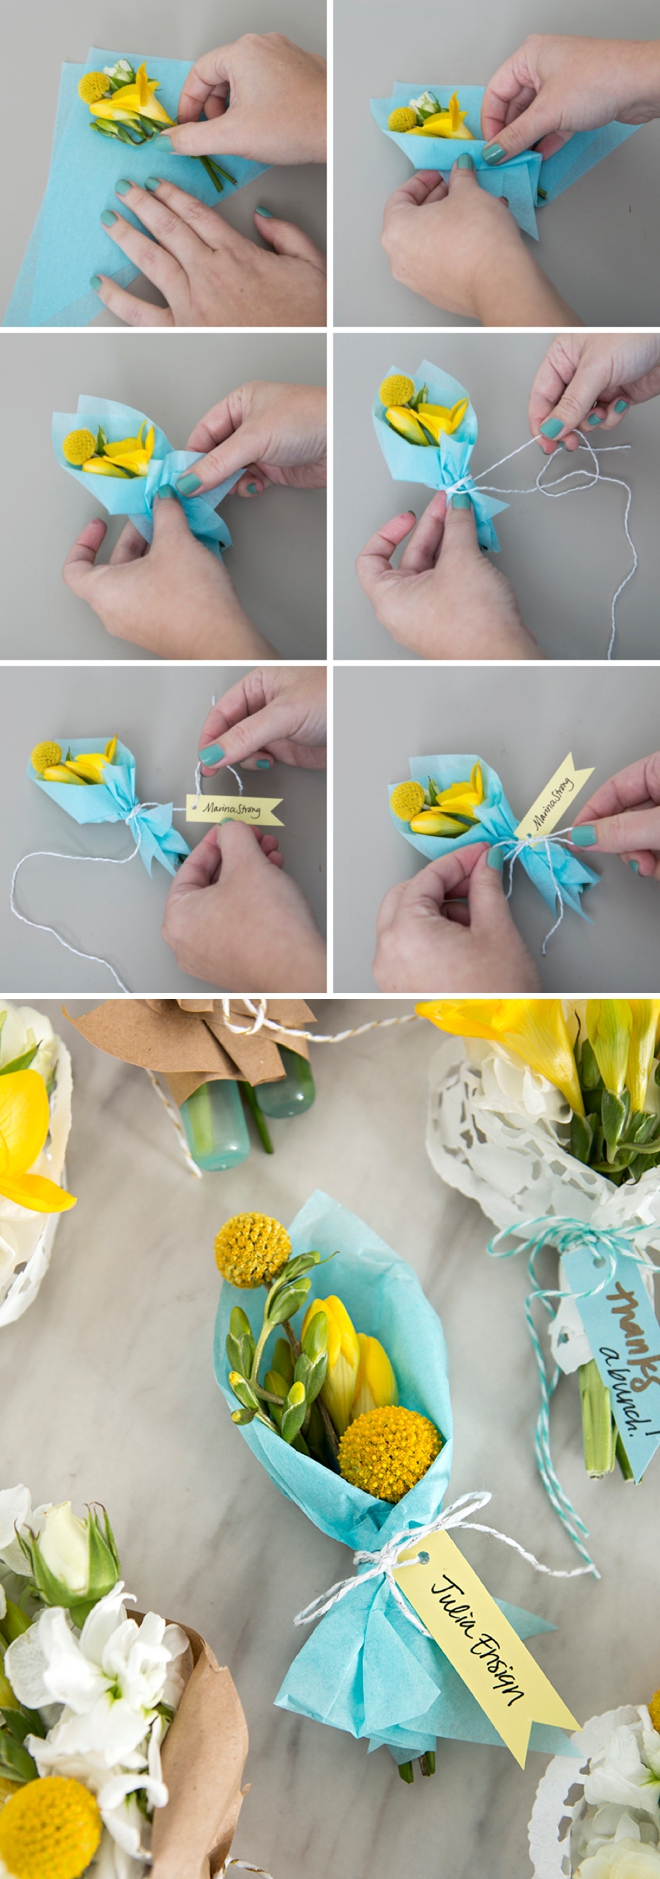 These DIY mini-bouquets are the absolute cutest!